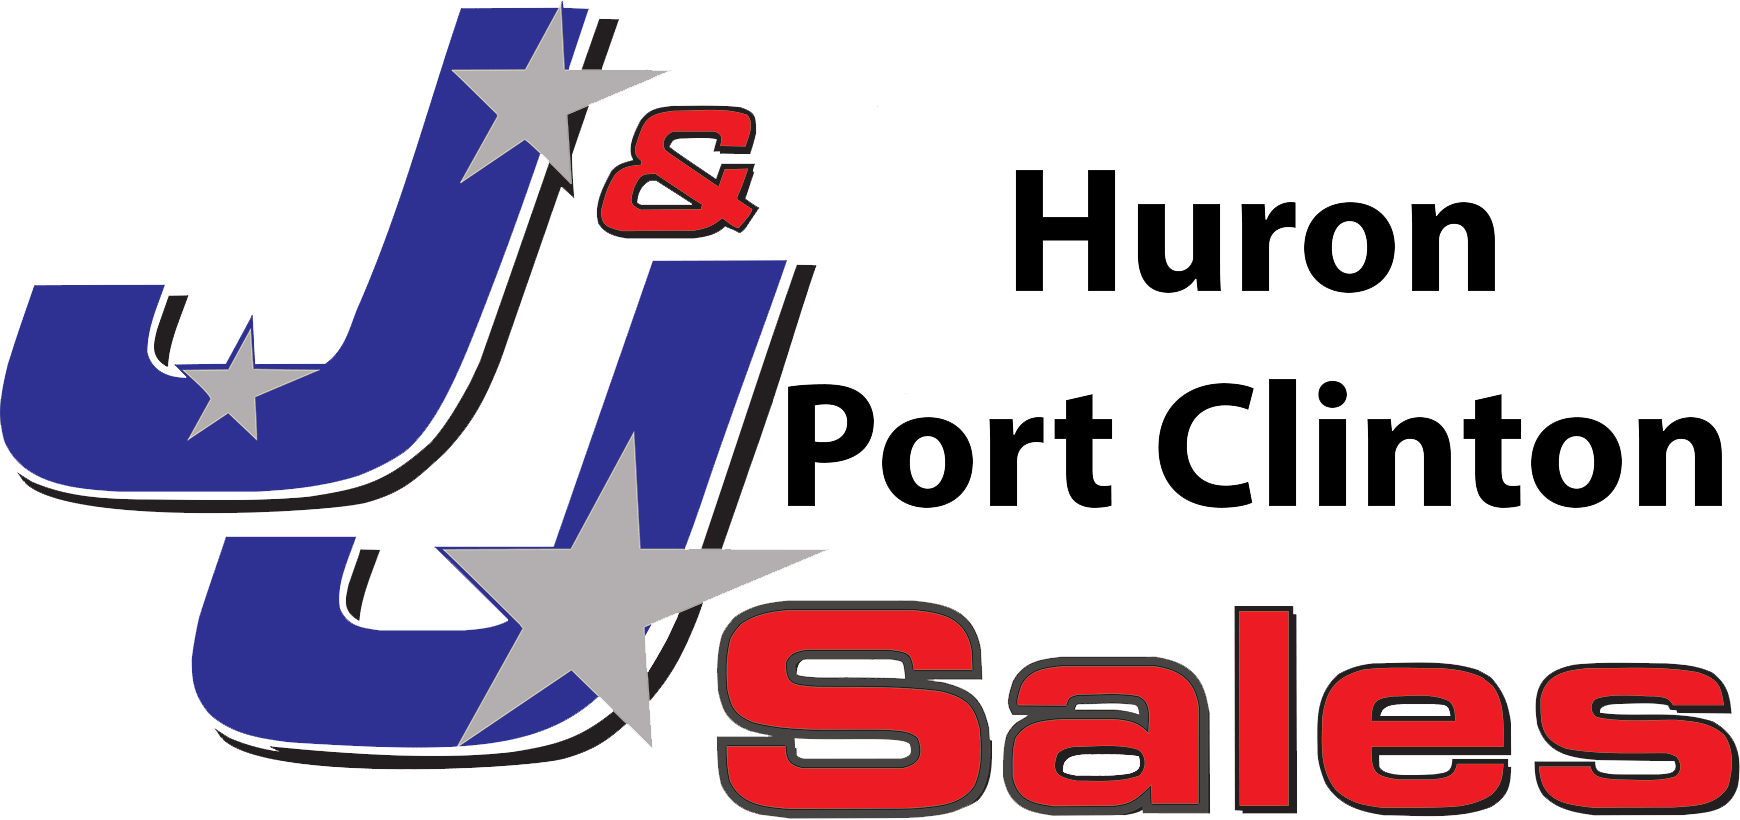 J&J Sales is located in Huron and Port Clinton, Ohio